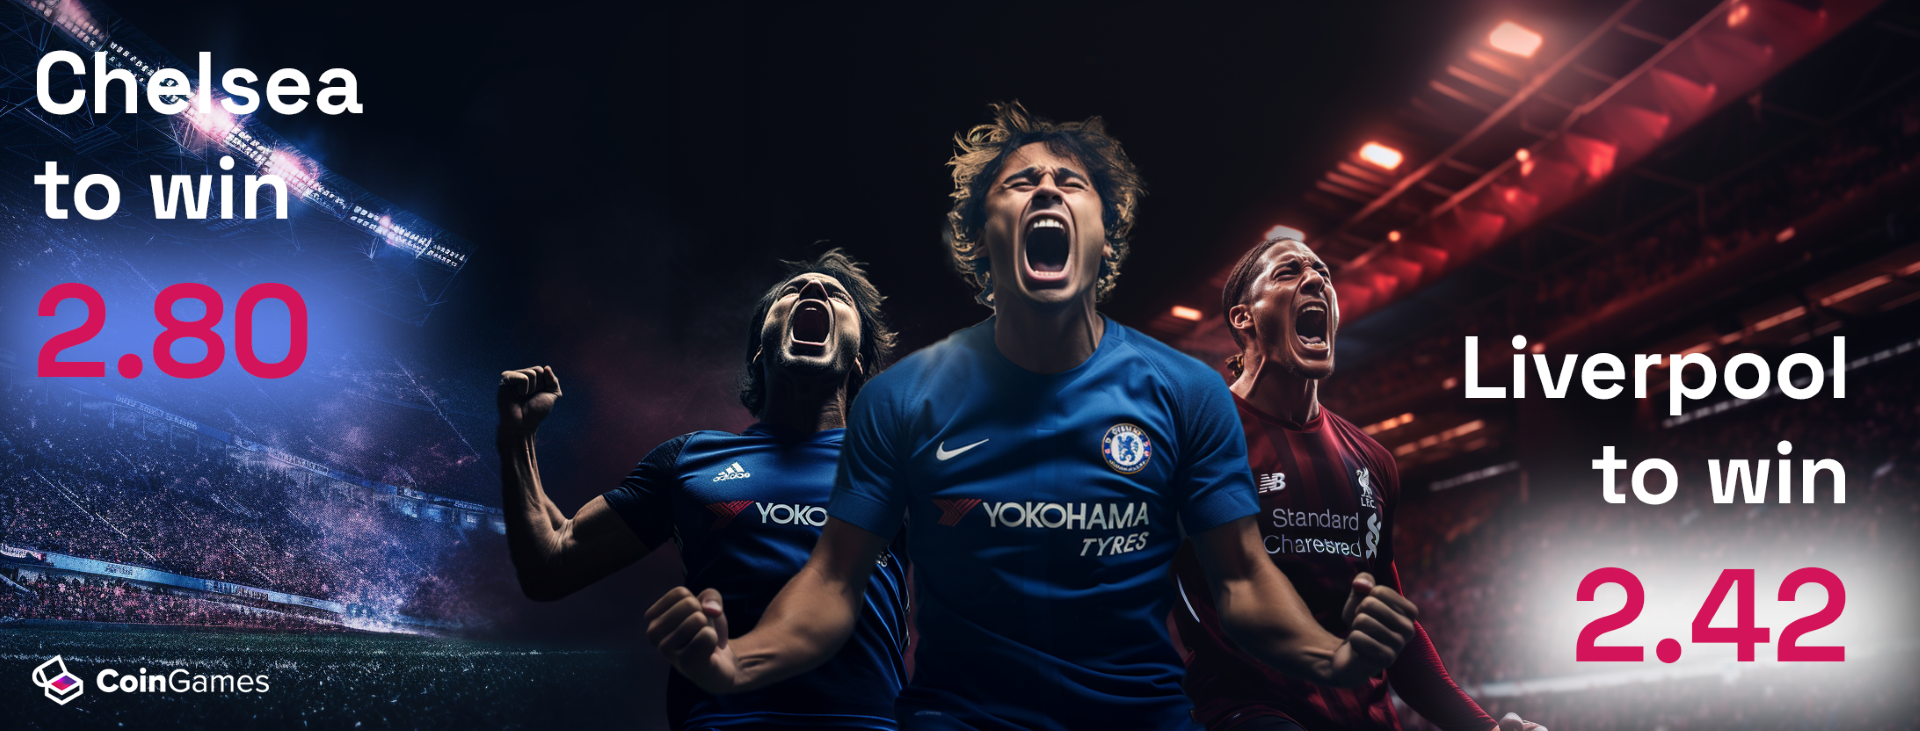 CoinGames Event of the Week: Premier League – Chelsea VS Liverpool